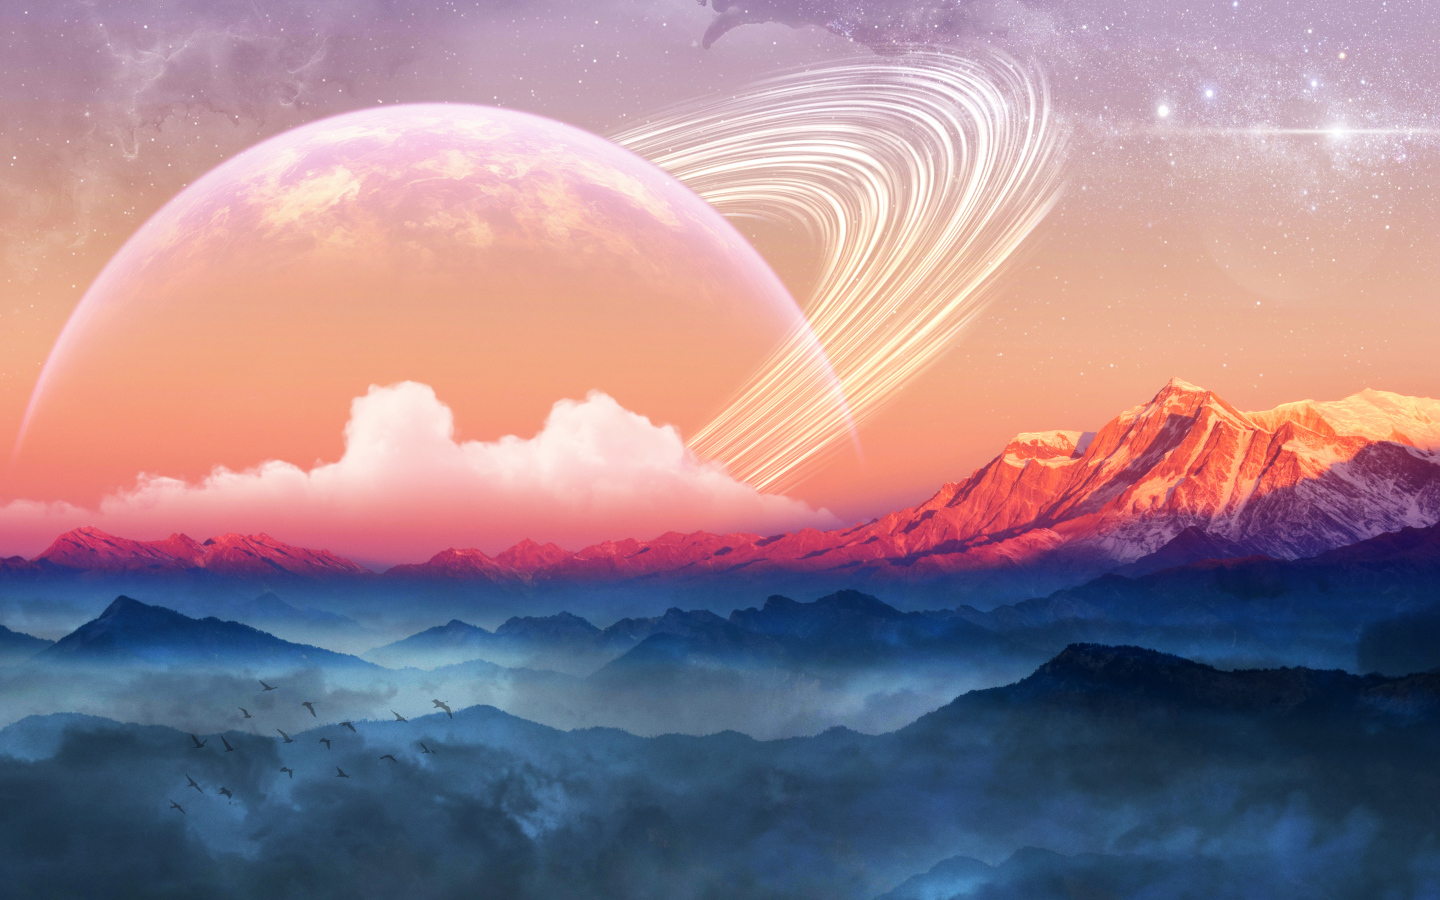 Fantastic sky with planets over snow-capped mountains.